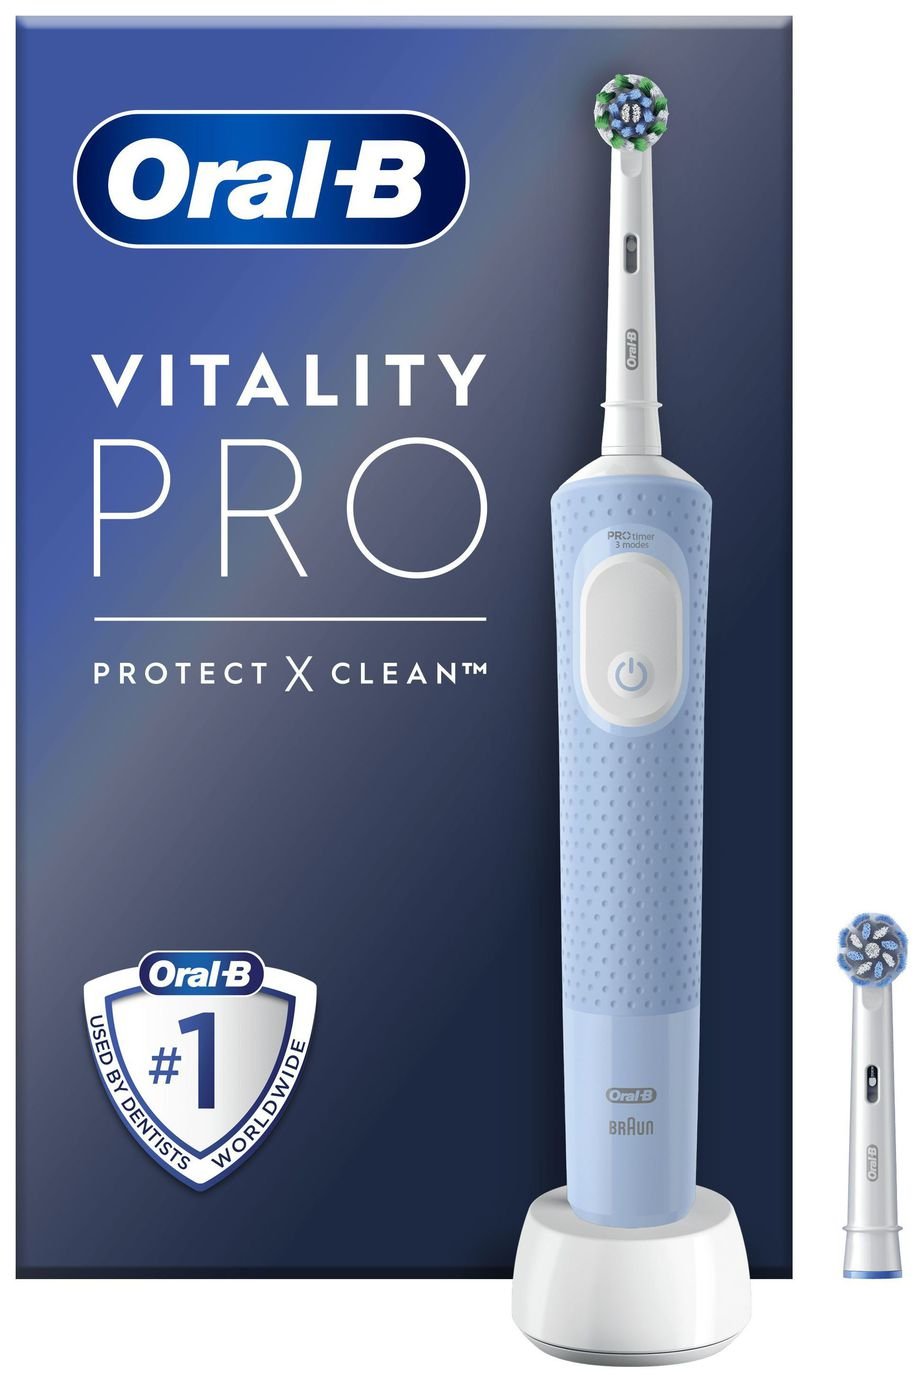 Oral-B Vitality Pro Electric Toothbrush - Blue